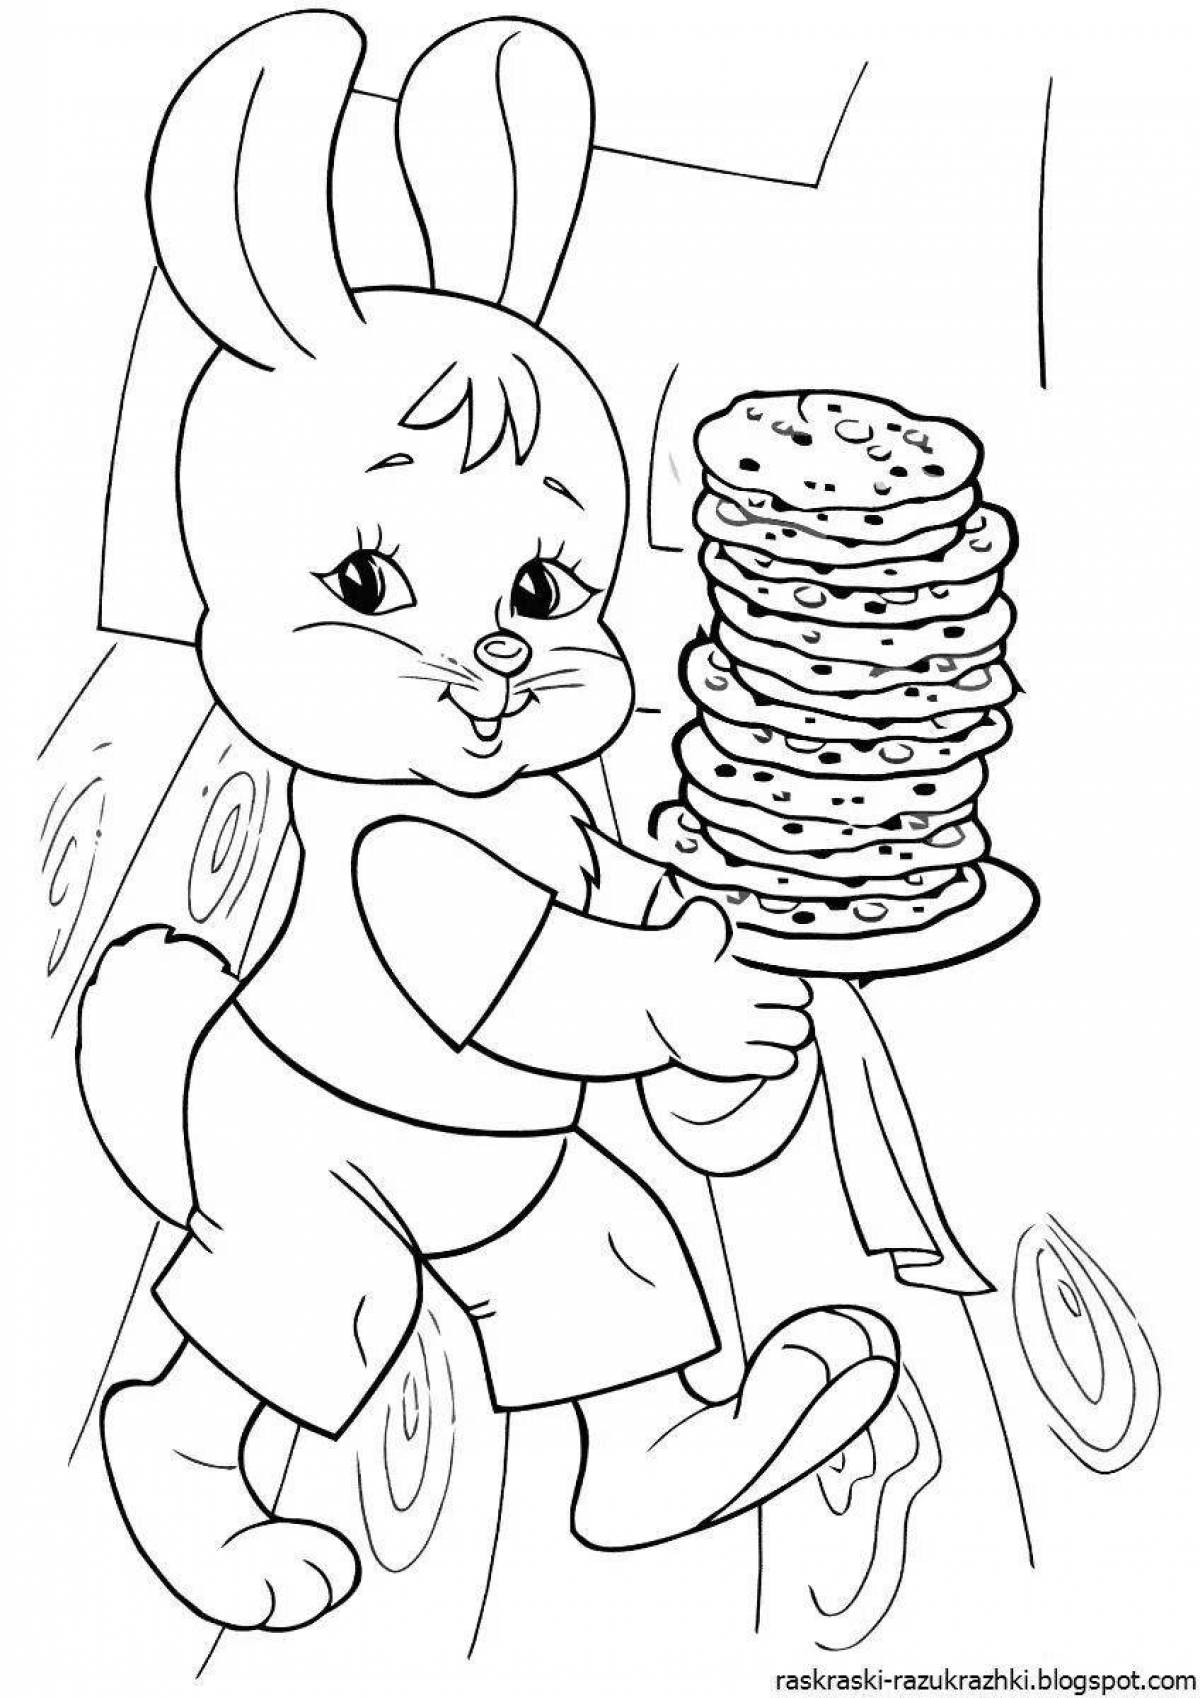 Colorful Pancake Tuesday coloring page